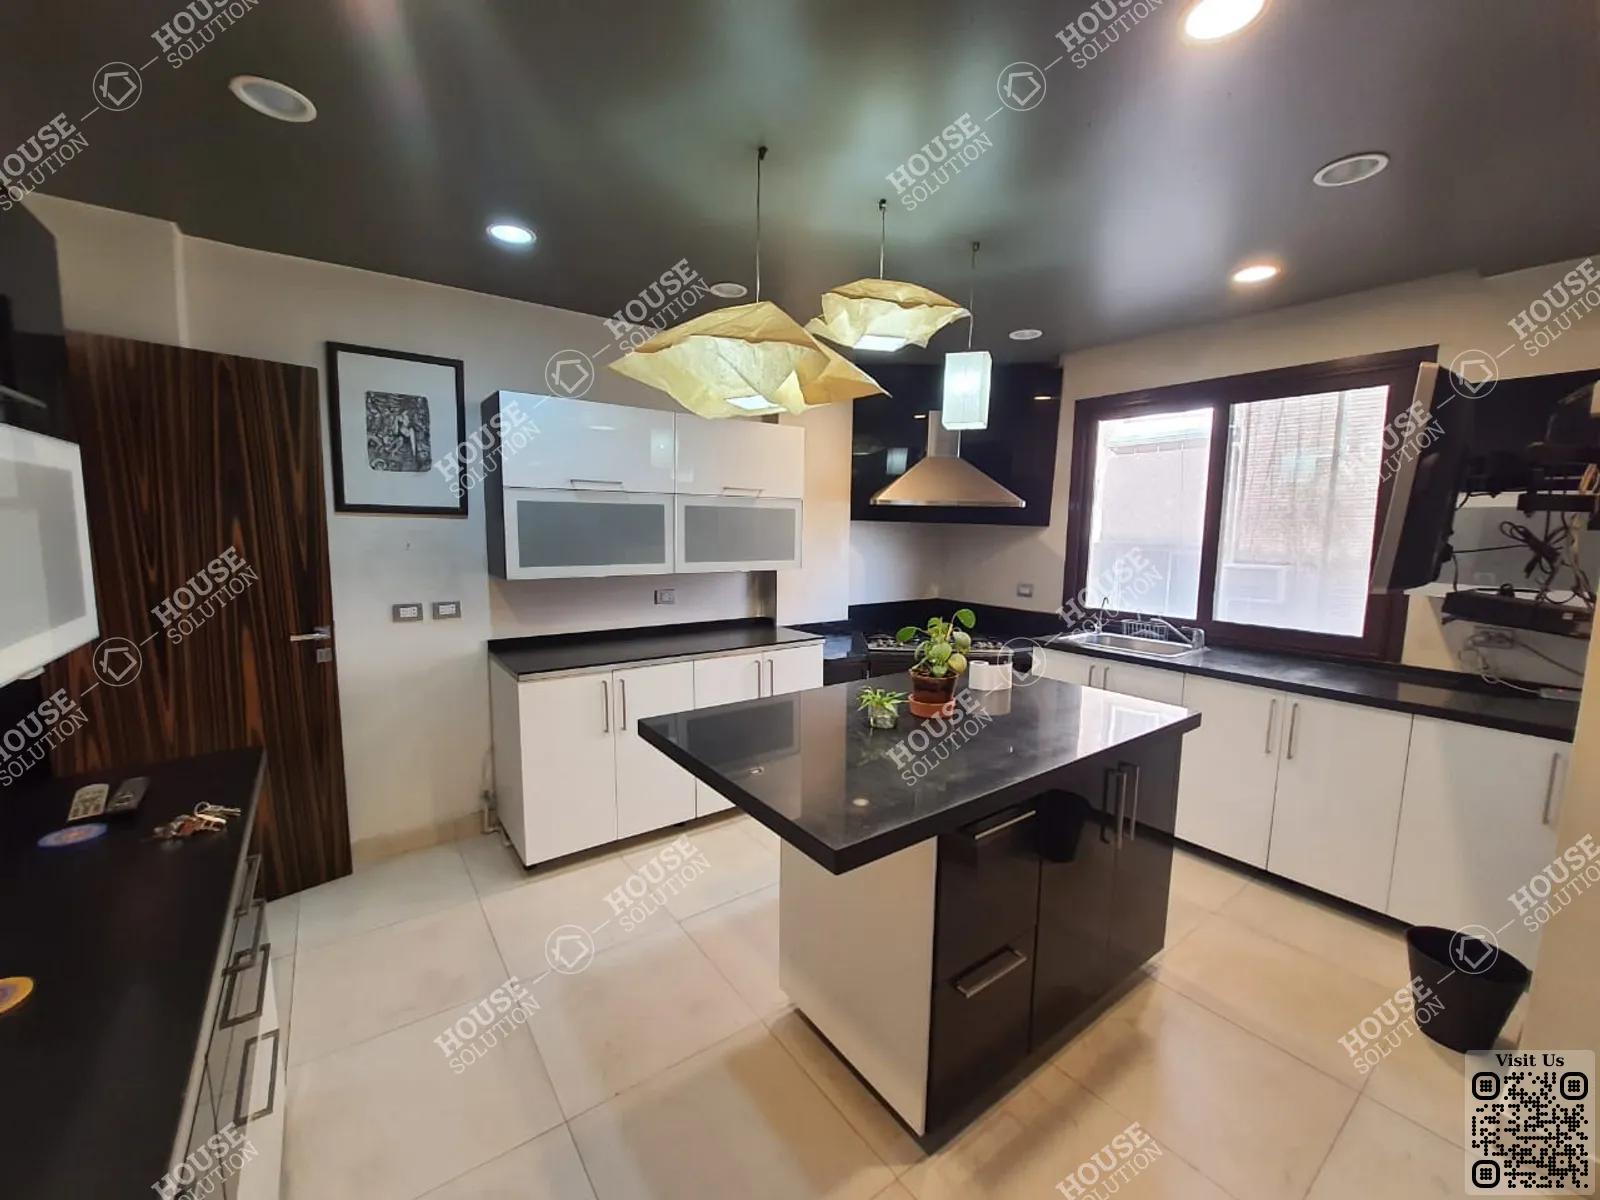 KITCHEN  @ Apartments For Rent In Maadi Maadi Degla Area: 250 m² consists of 3 Bedrooms 3 Bathrooms Modern furnished 5 stars #5195-2